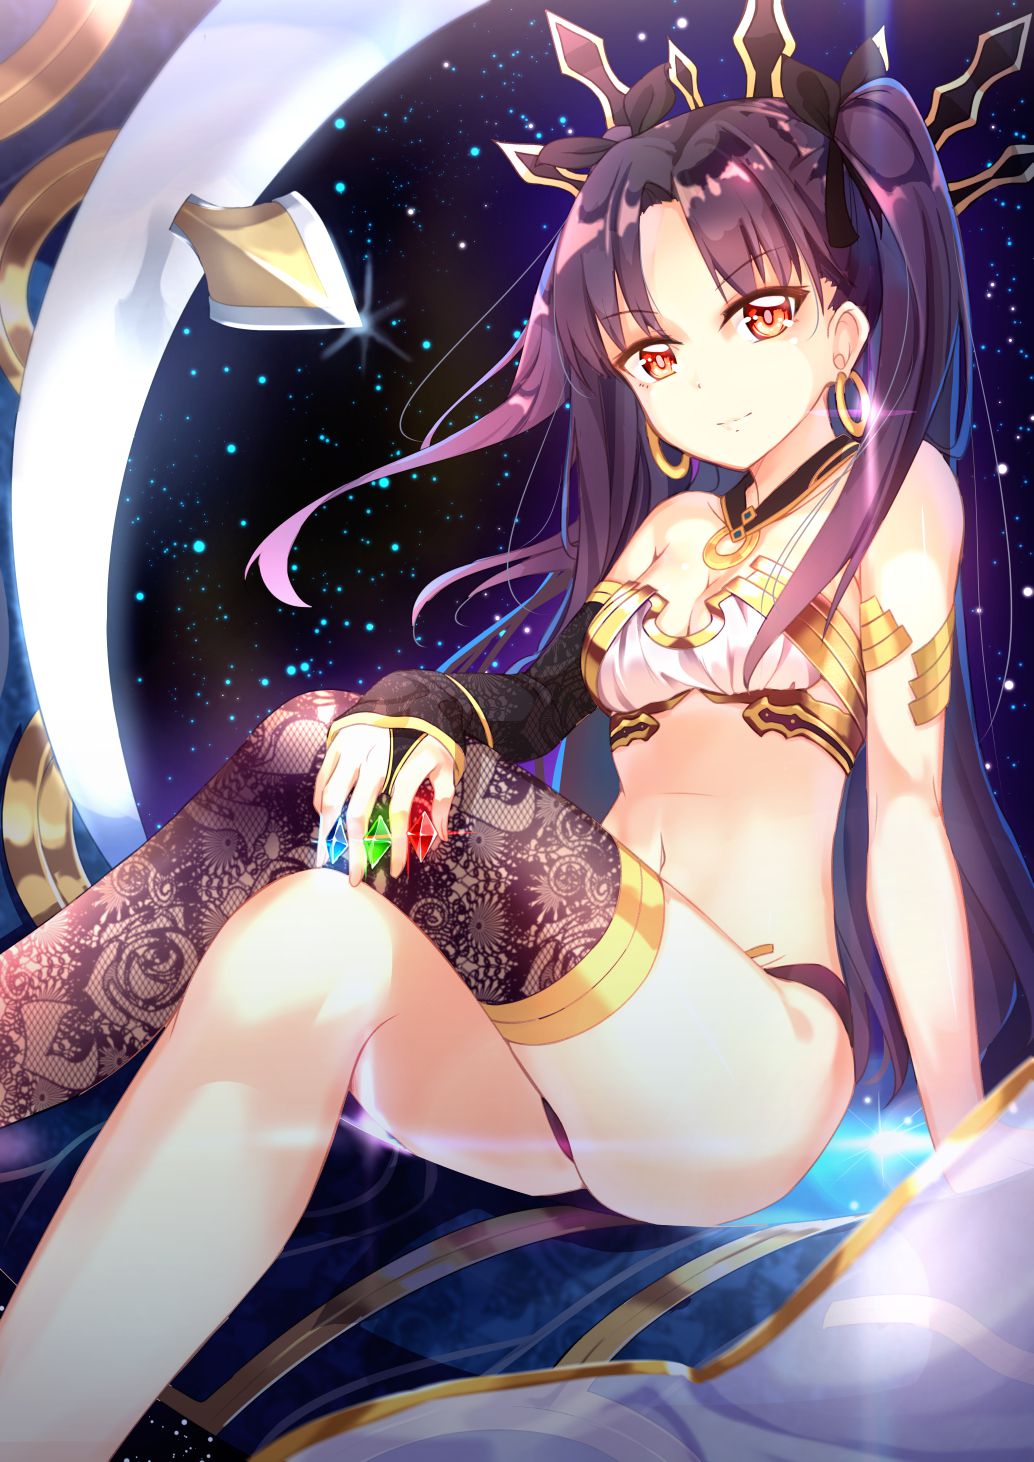 Rin Tosaka's erotic secondary erotic images are full of boobs! 【Fate Grand Order】 15